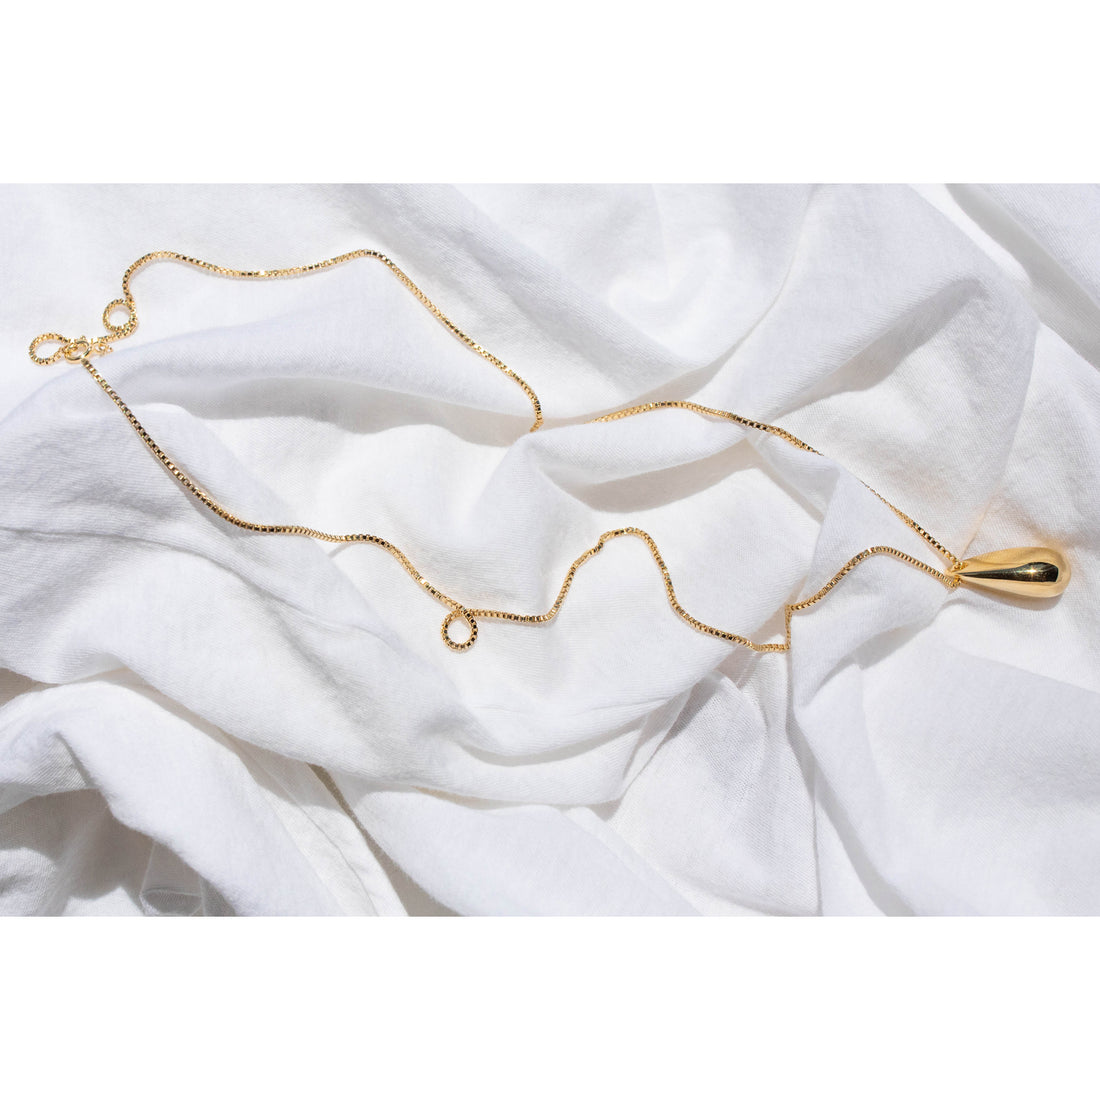 Fay Andrada Nena Necklace in Gold Plated Brass